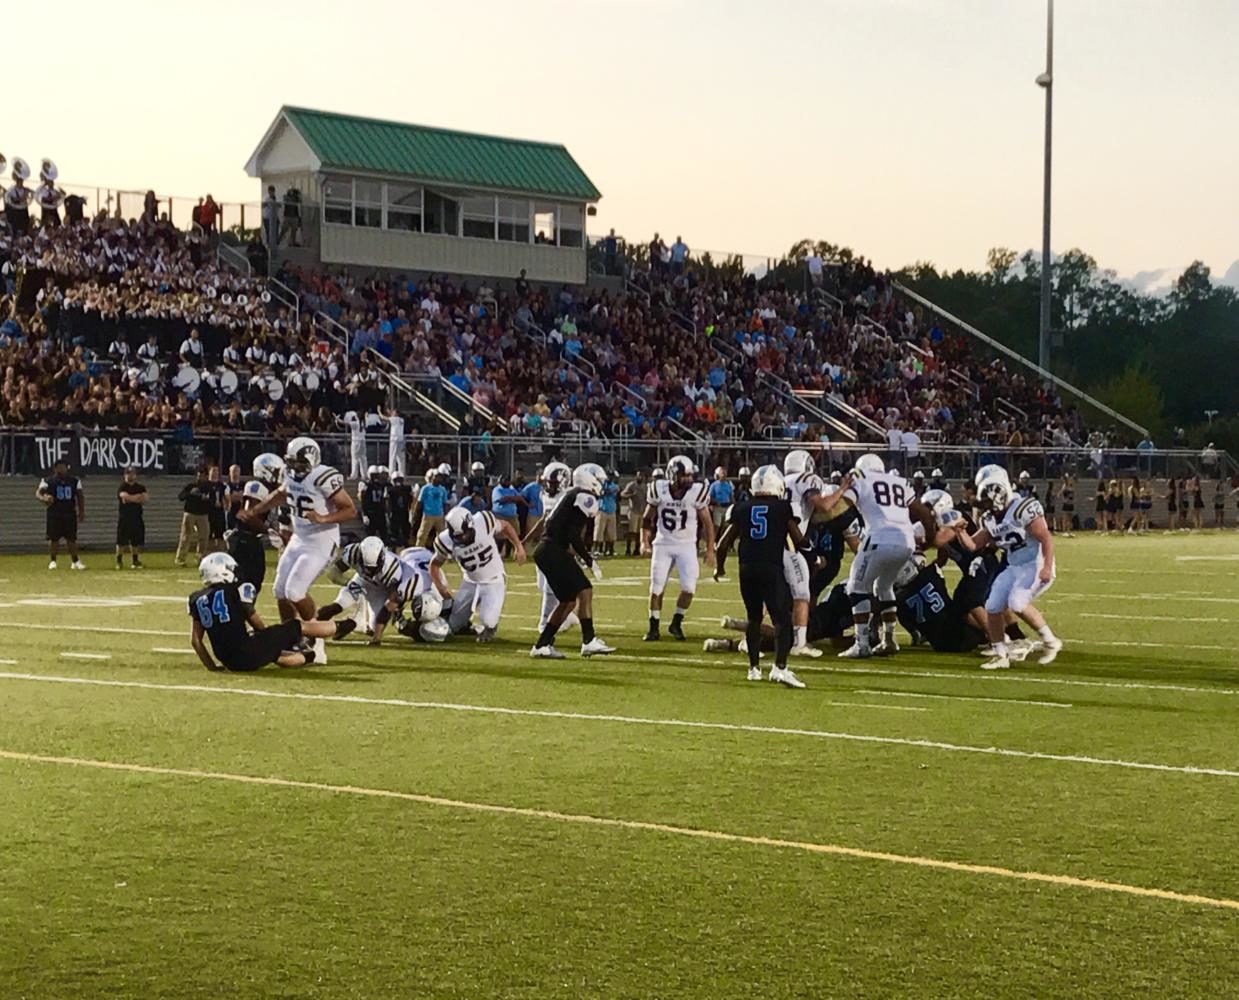 Lafayette and Warhill battle late in the first quarter on Friday, September 15th as Warhills home stands look on.